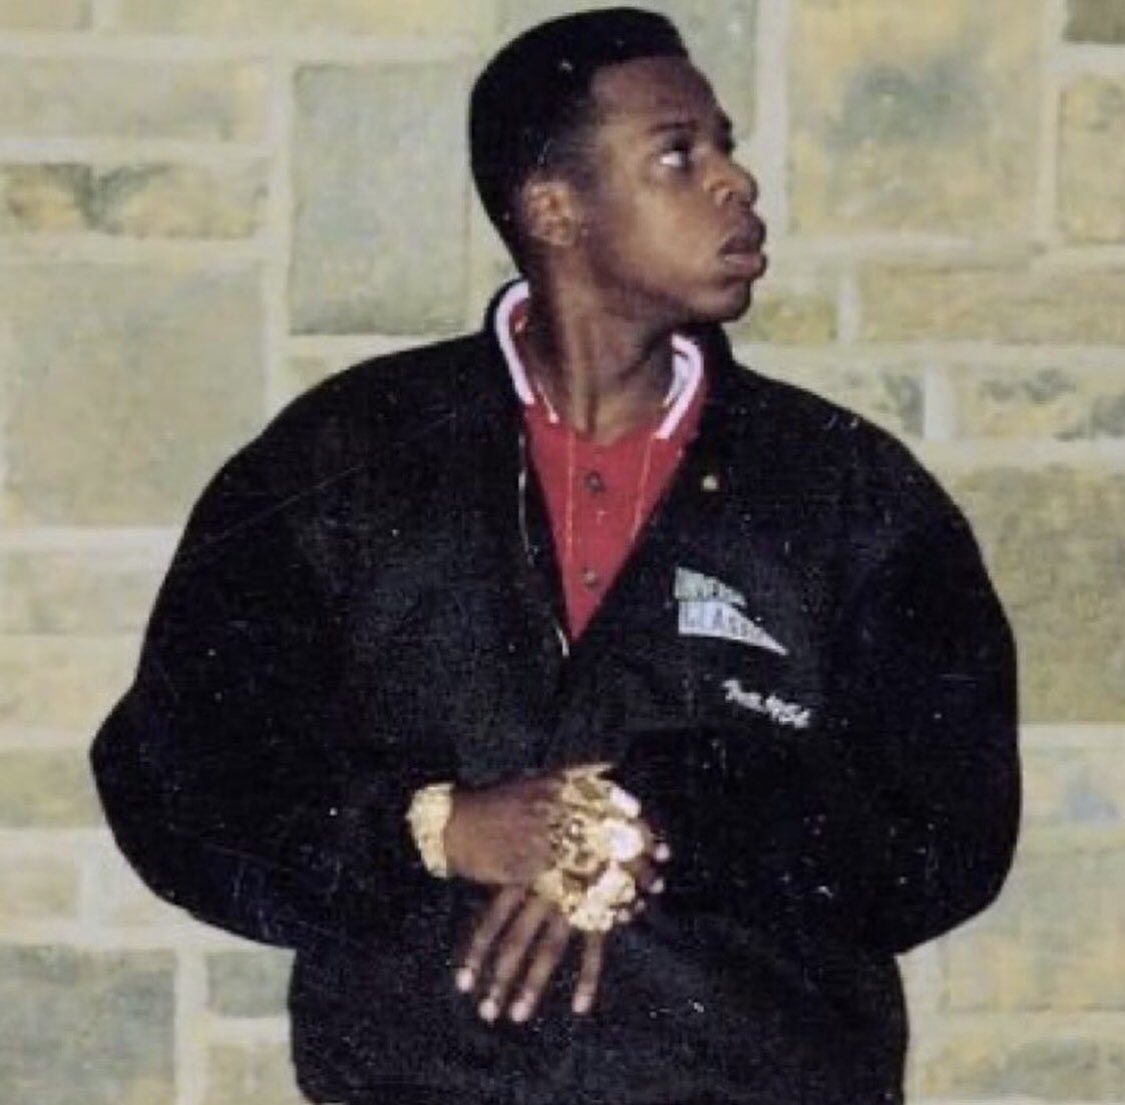 “9 to 5 is how you survive, I ain’t tryna survive. I’m tryna live it to the limit & love it a lot”A late bloomer in the rap game, a young JayZ still grinding in the underworld. The stories told on his debut album would grow from these experiences.